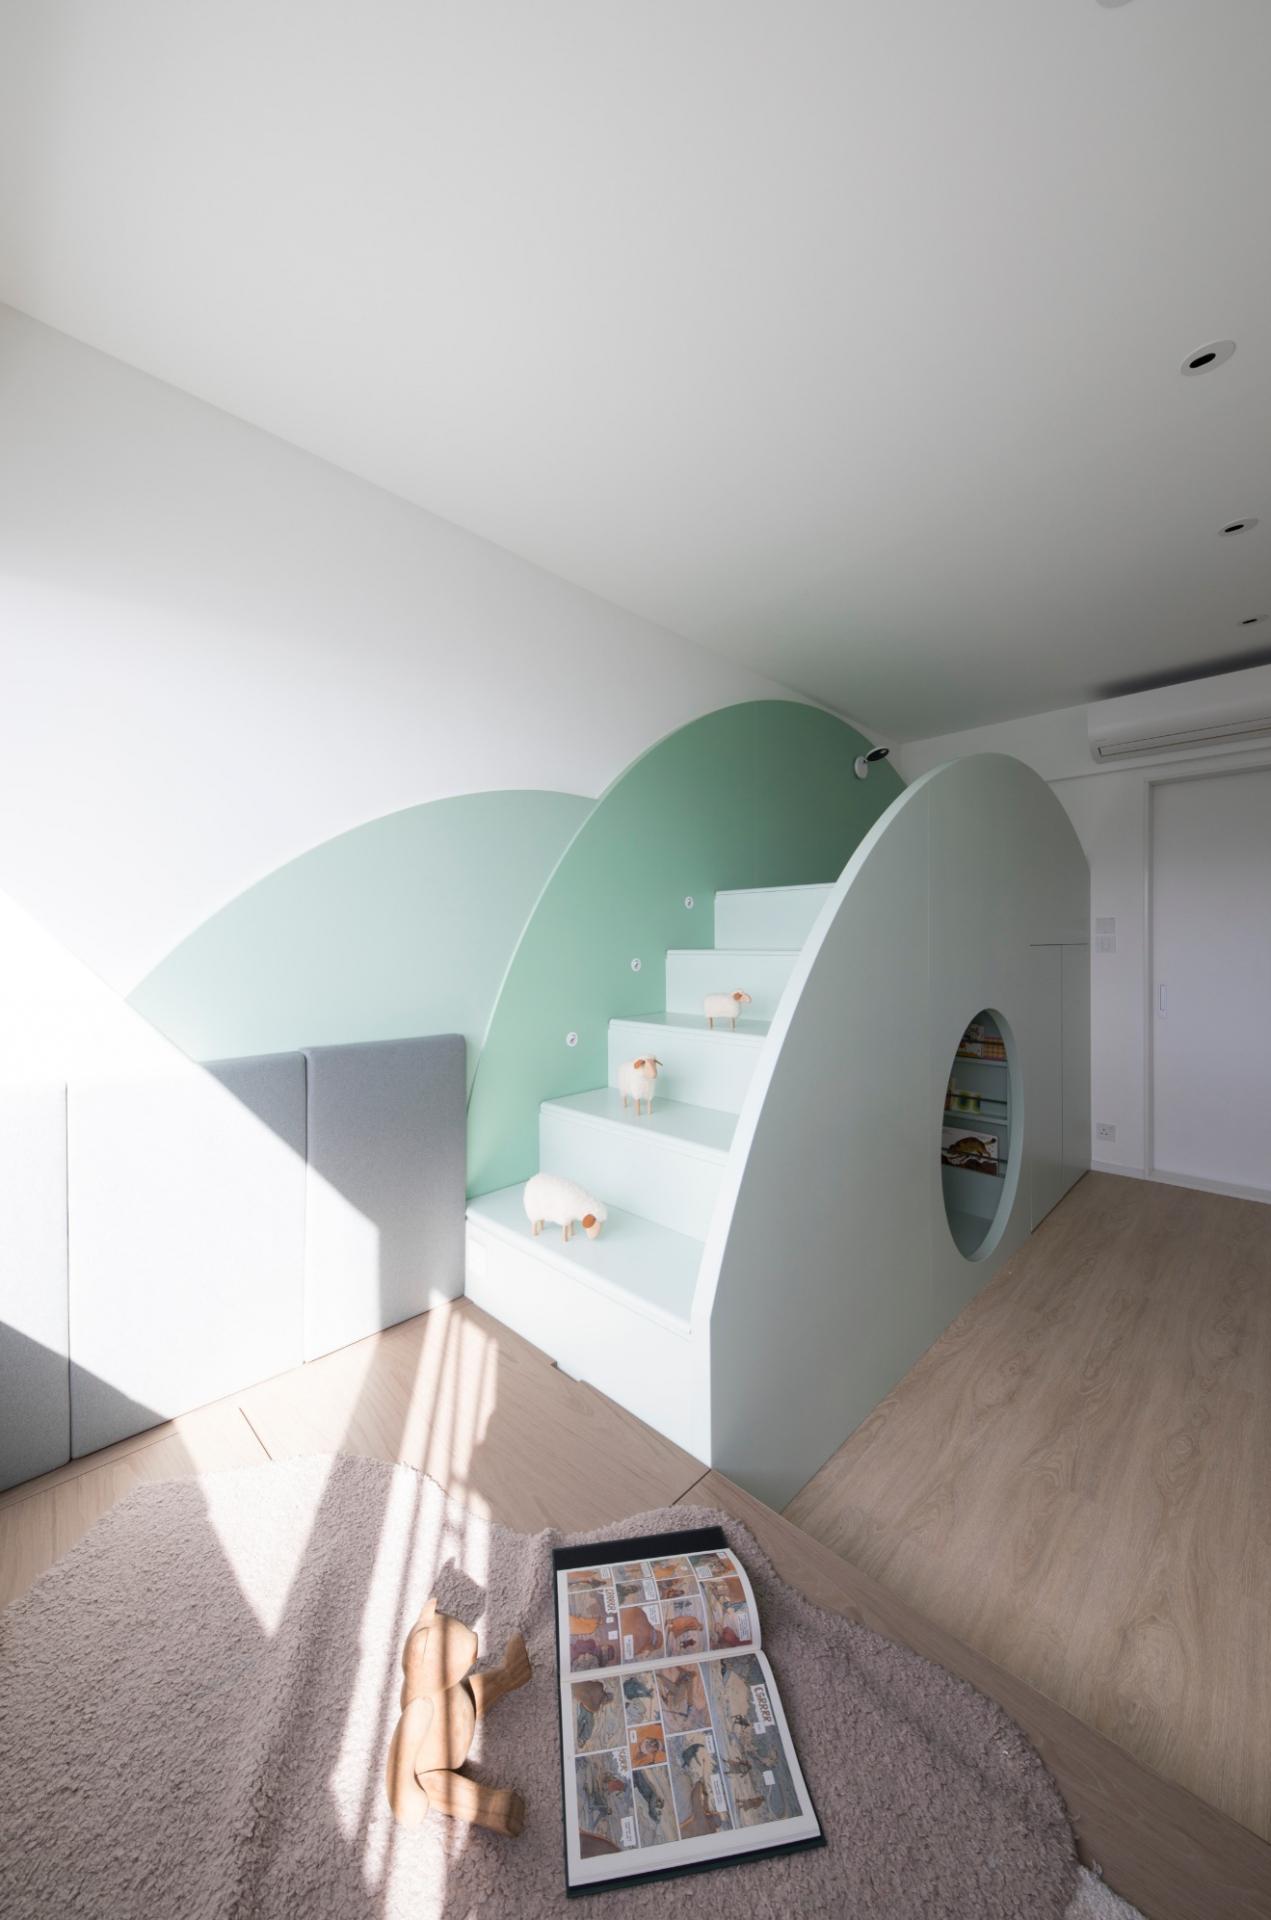  This 2,000 sq. ft. sea view flat links three generations of a family with curves